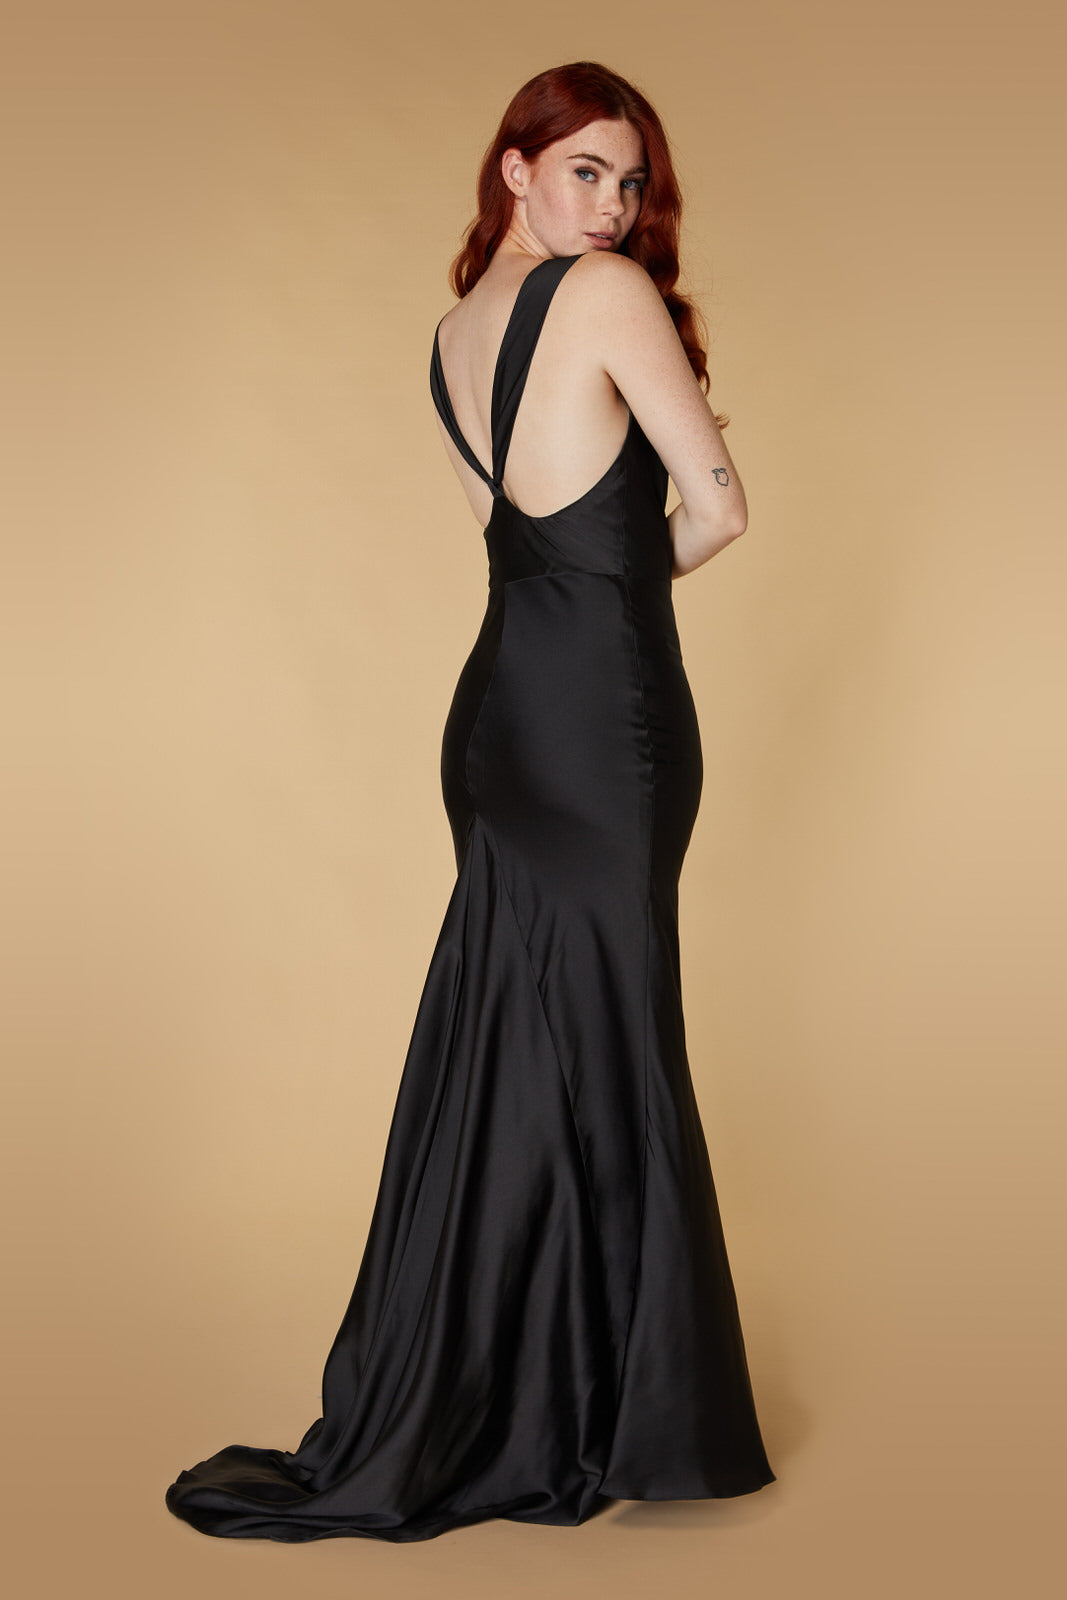 Mika Cowl Front Maxi Dress With Strappy Back Detail, UK 10 / US 6 / EU 38 / Black